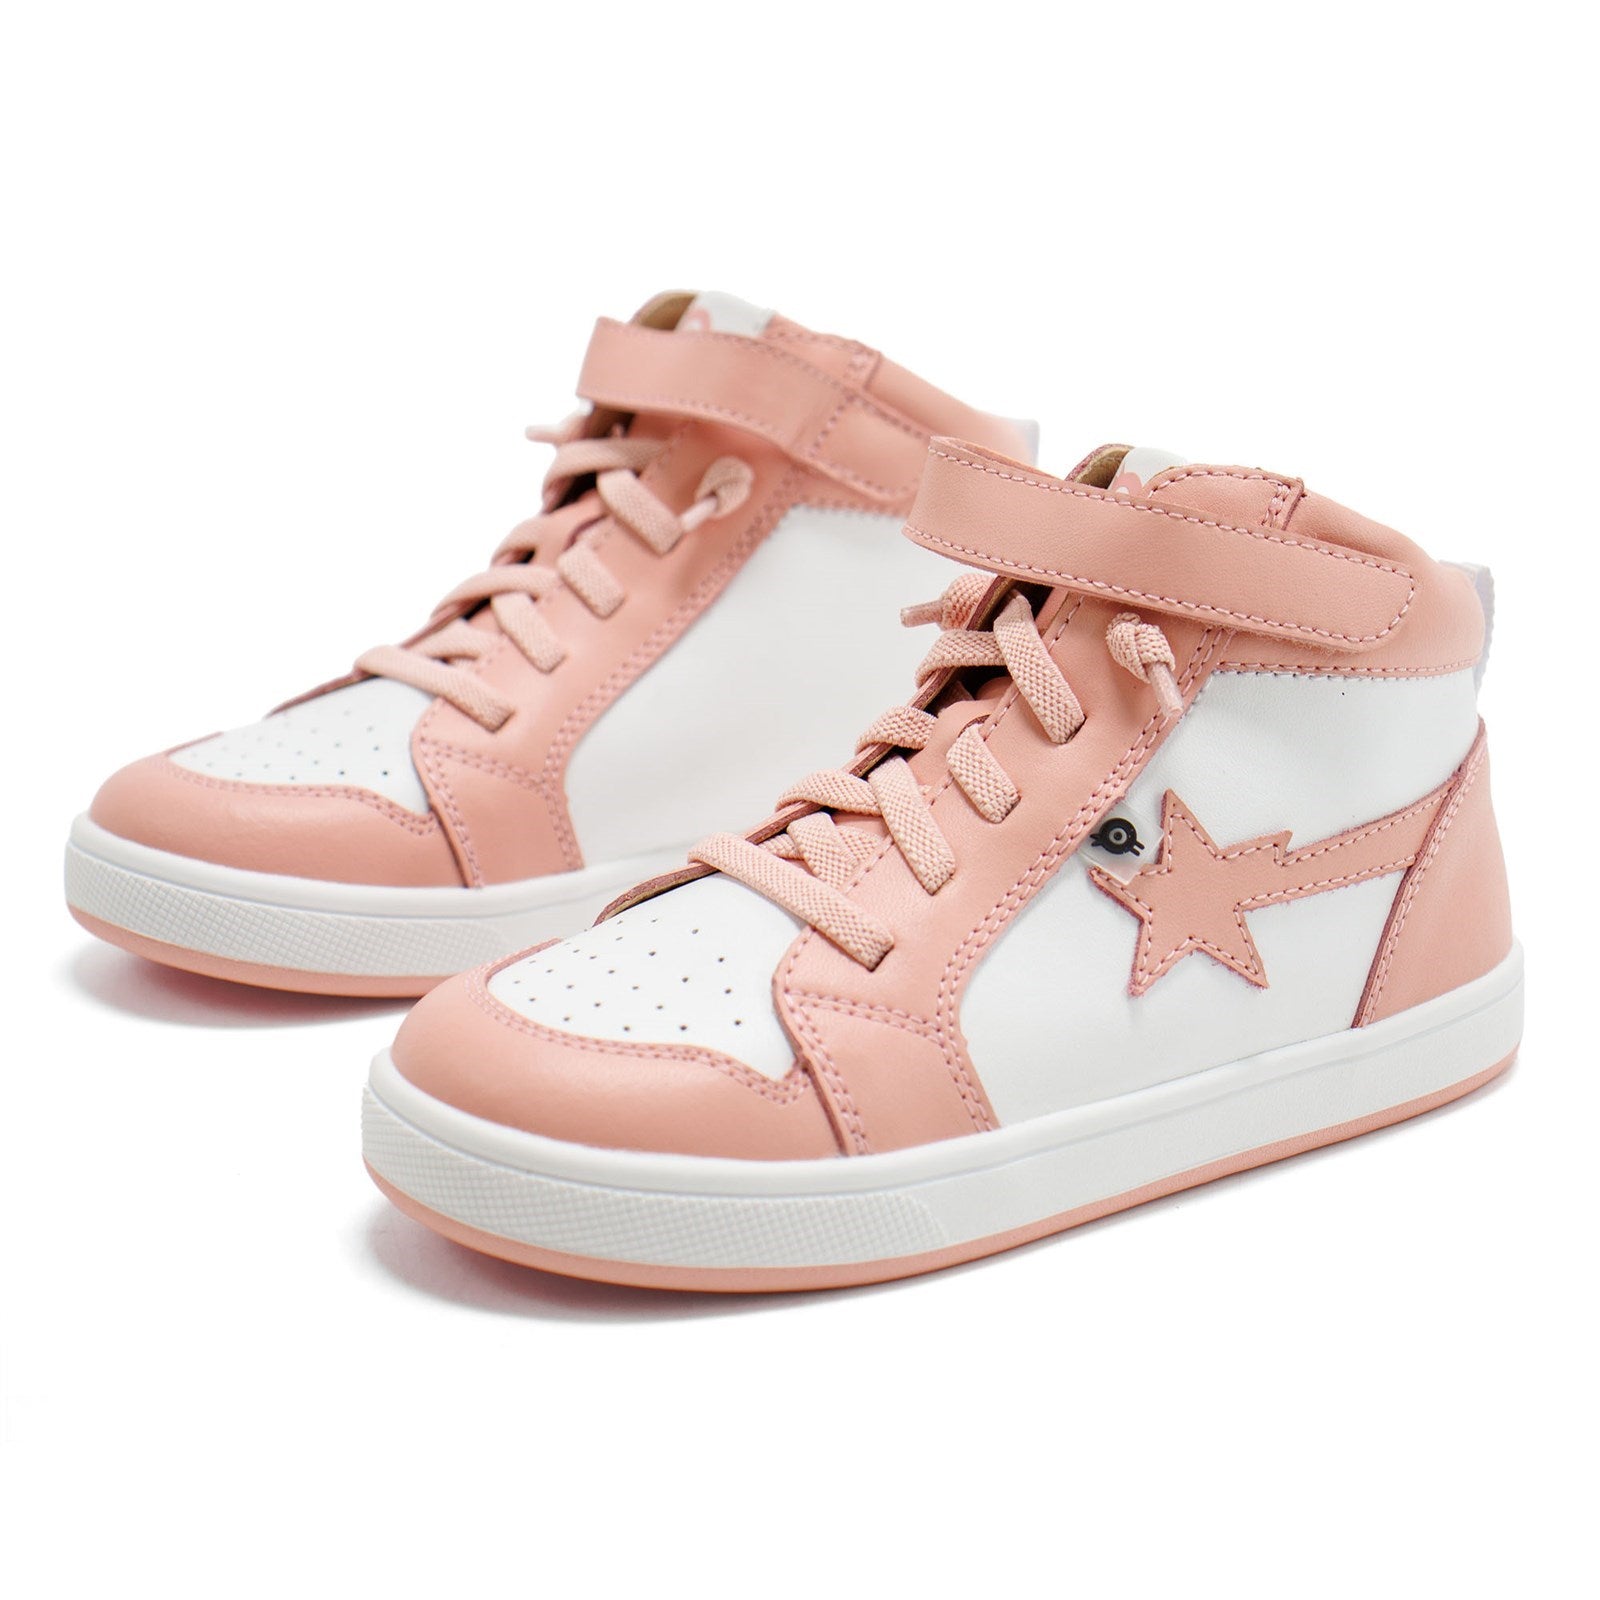 Old Soles Toddler Team Star High Top Lace-Up Sneakers